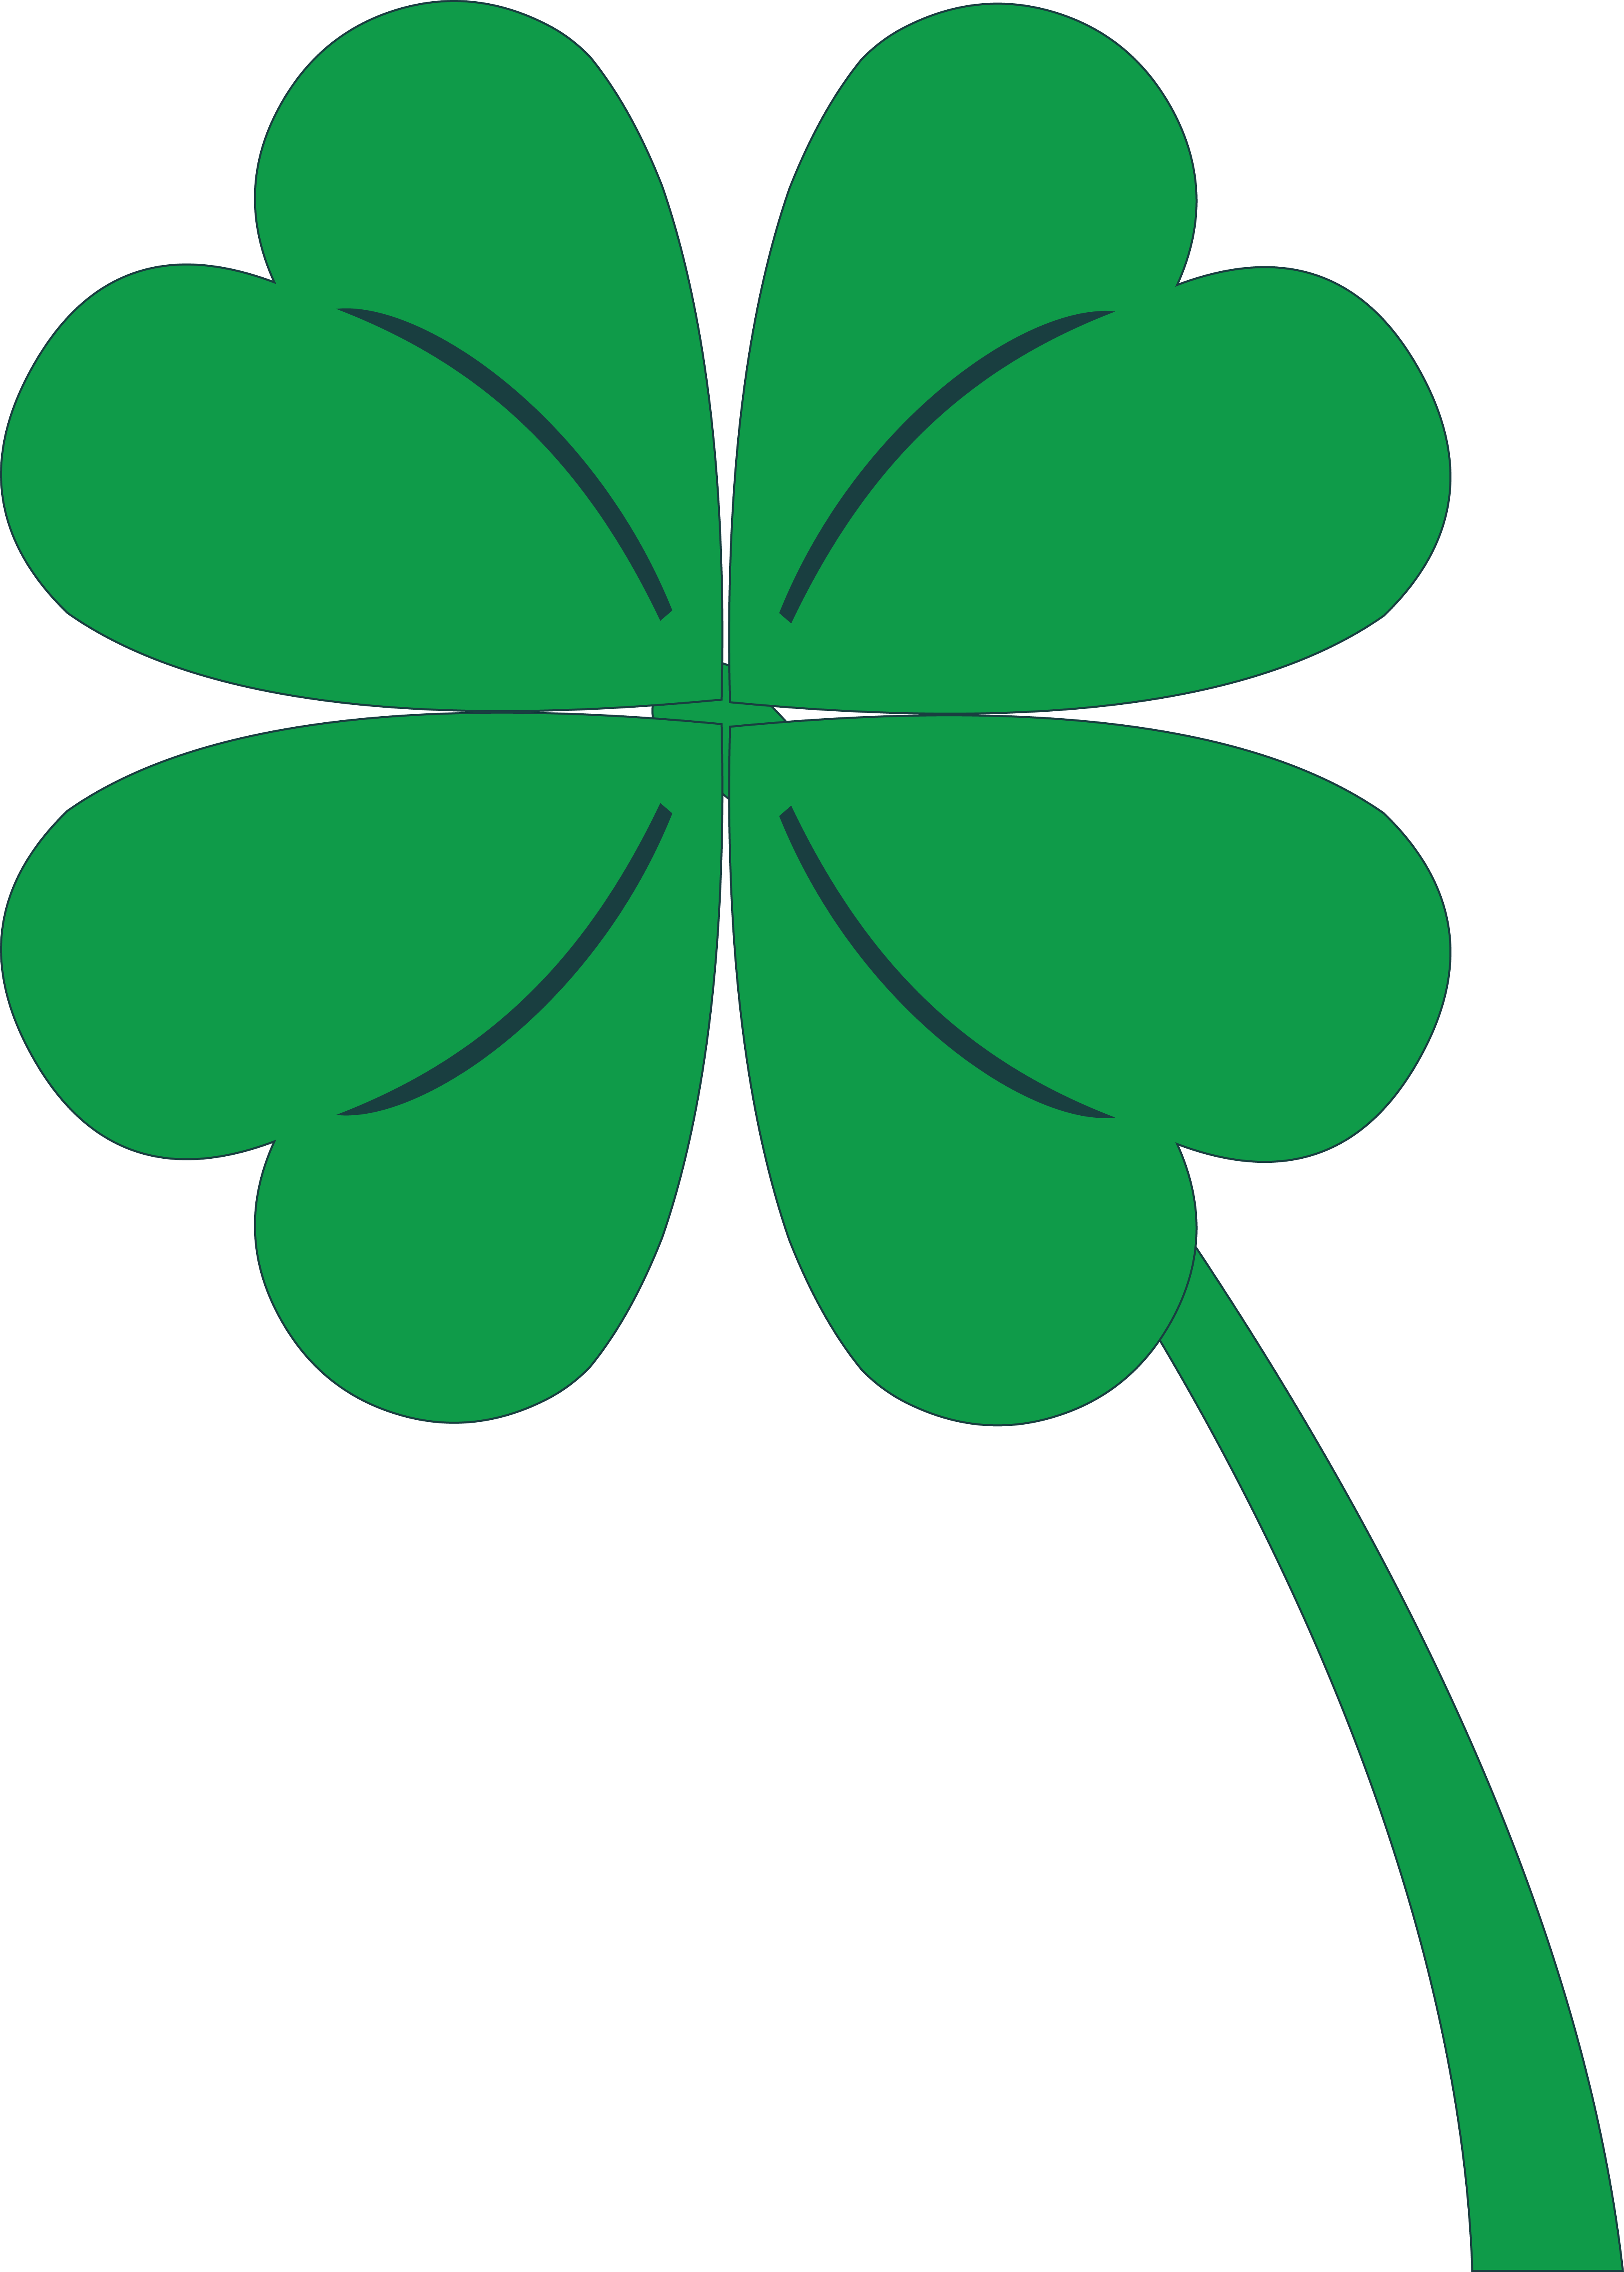 Zipper clipart day. Three leaf clover at